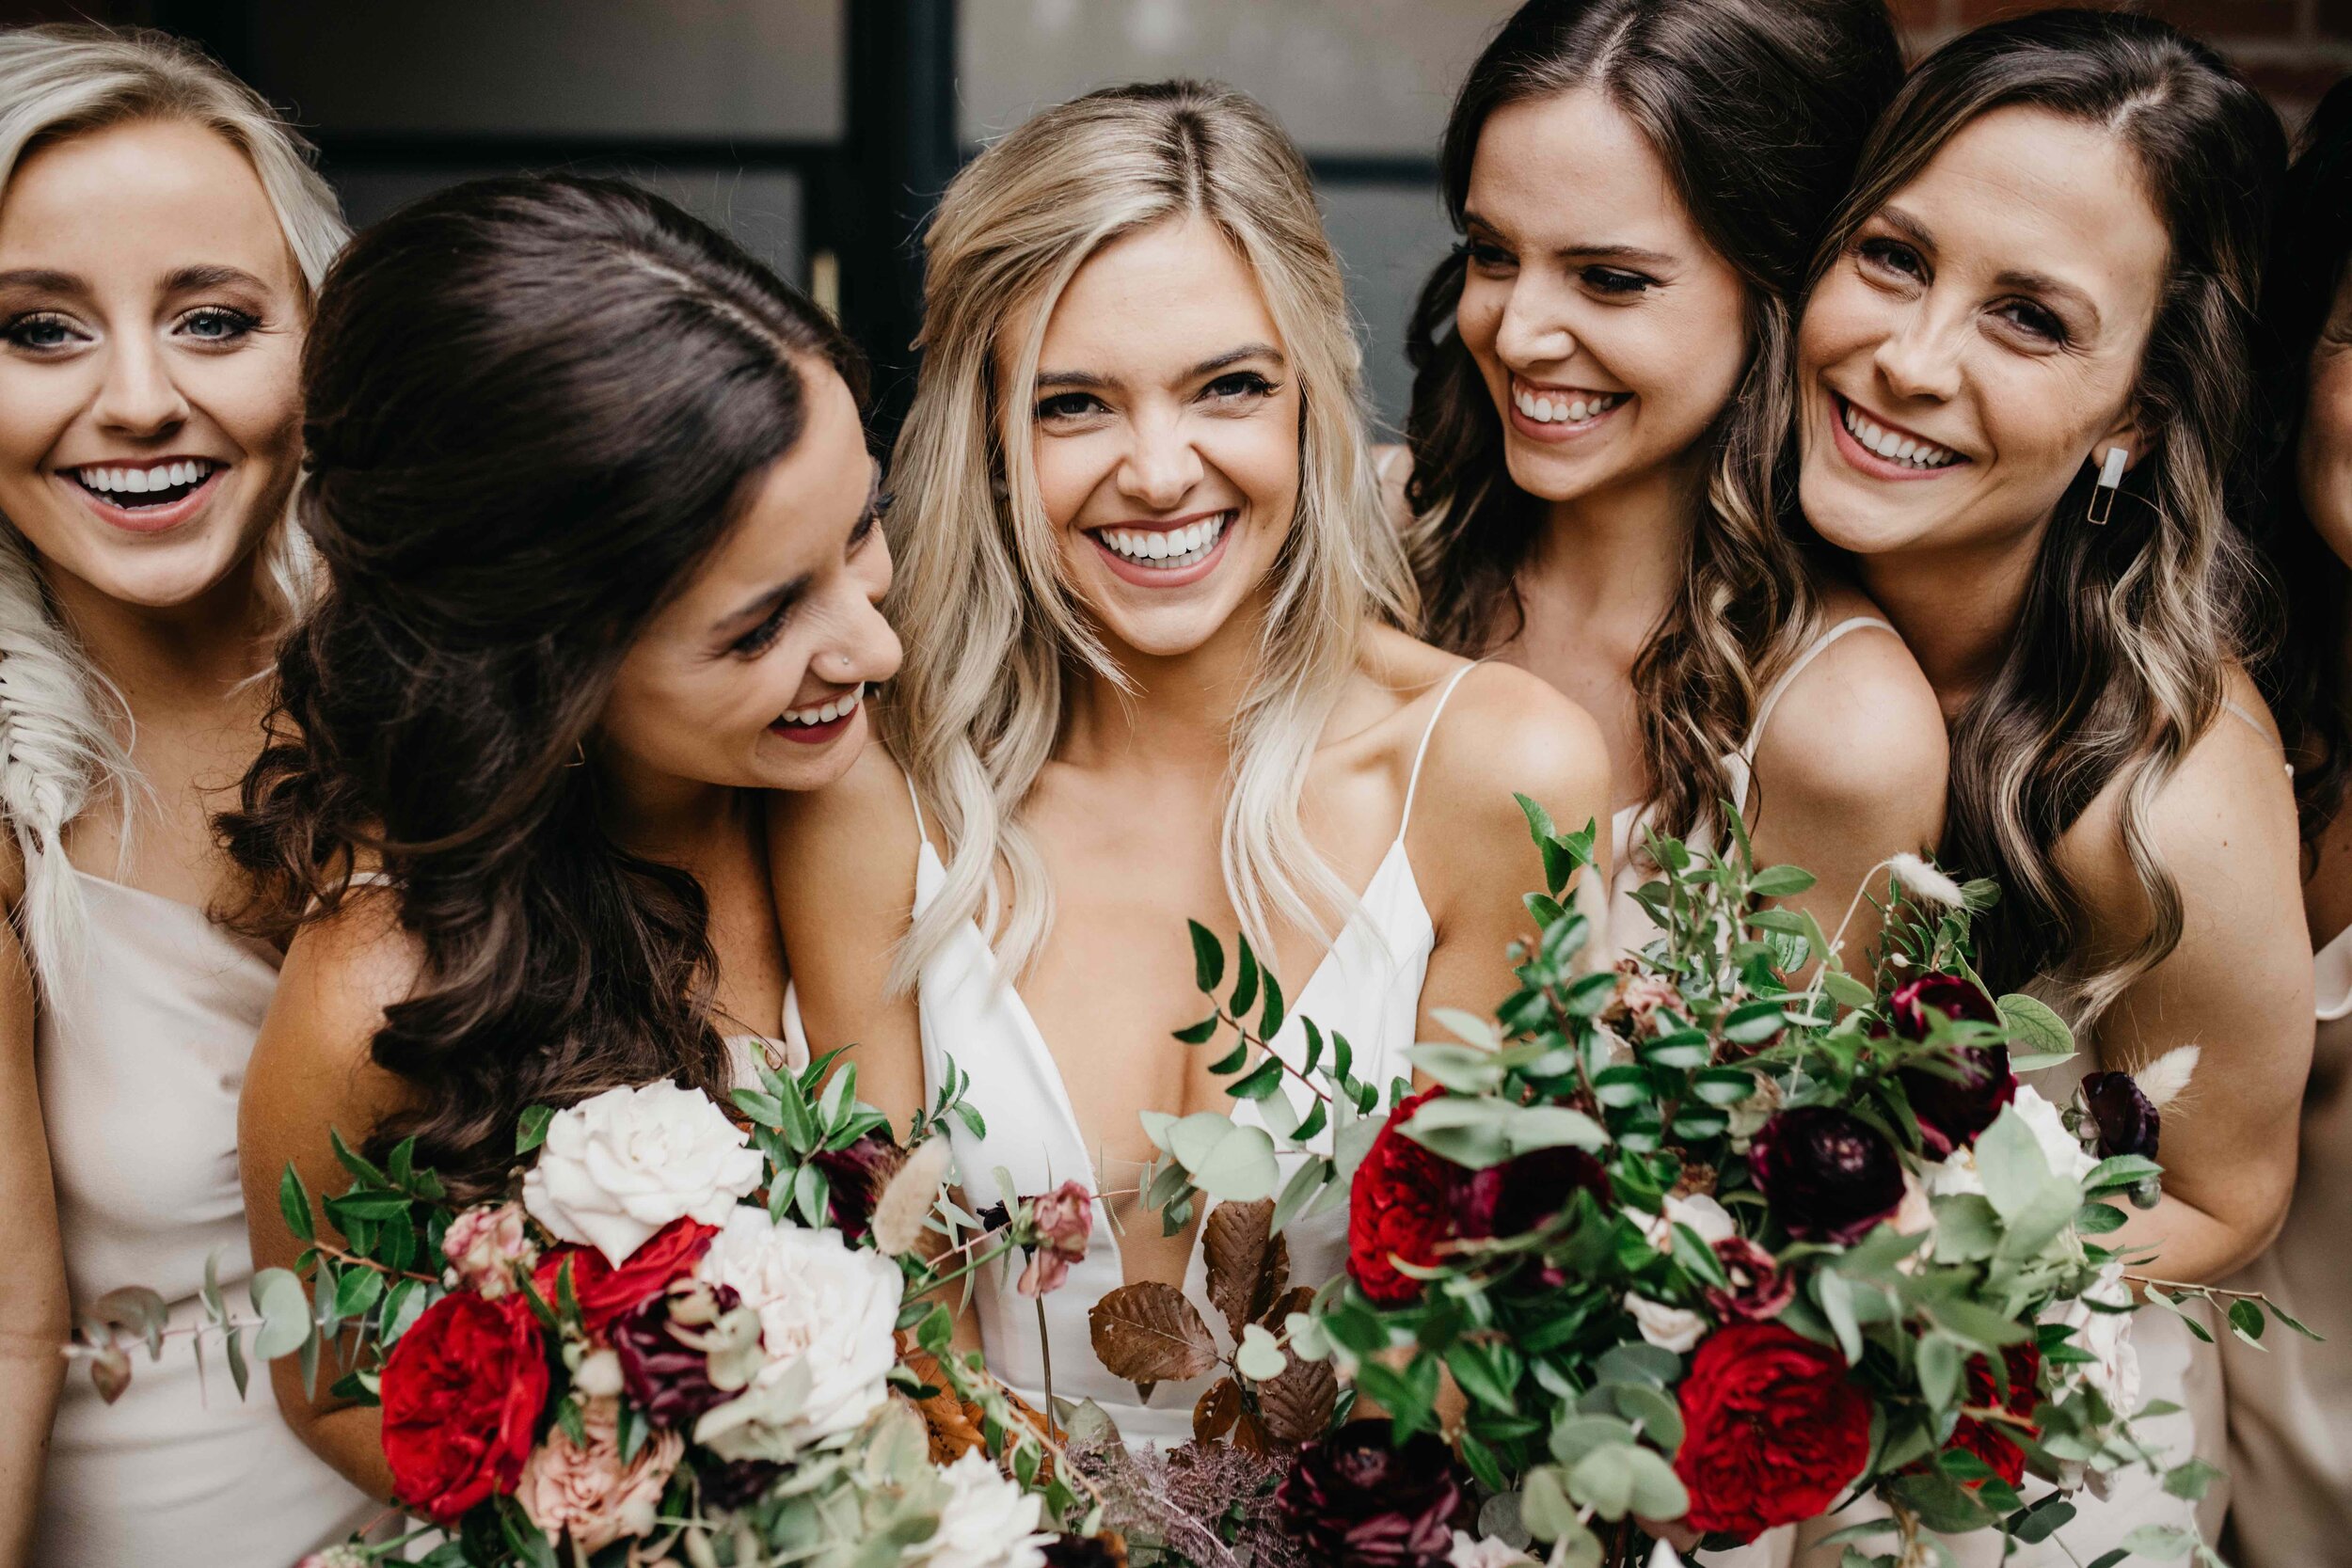 Champagne bridesmaid dresses with vibrant, deep color palette for the bouquets with burgundy garden roses, dusty rose and eggplant ranunculus, copper fall foliage, and airy greenery. Nashville wedding florist, Rosemary & Finch Floral Design.